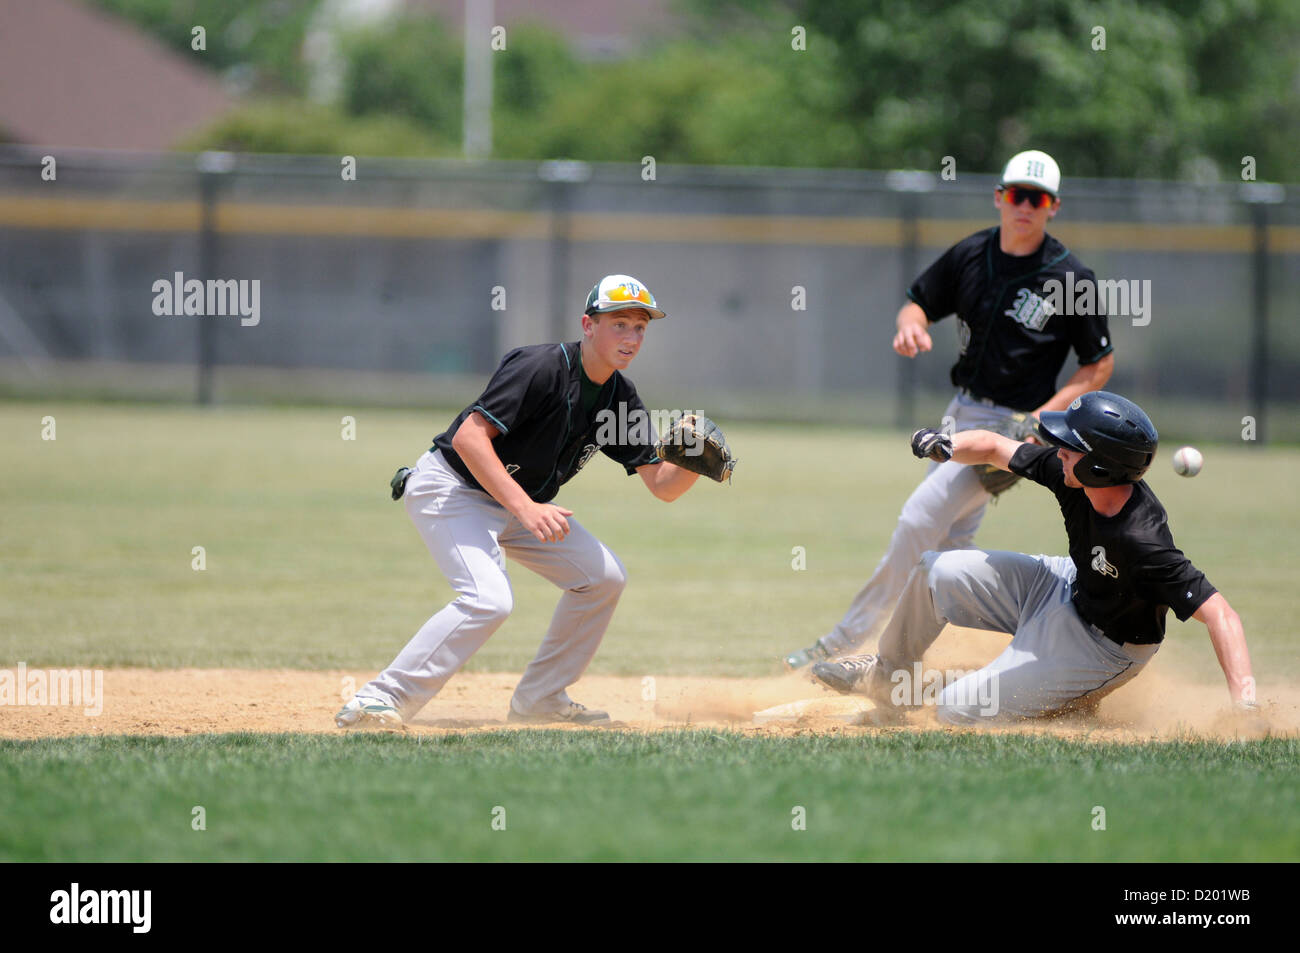 Baseball Base runner slides in safely with a steal of second base as the opposing shortstop awaits the tardy throw. USA. Stock Photo